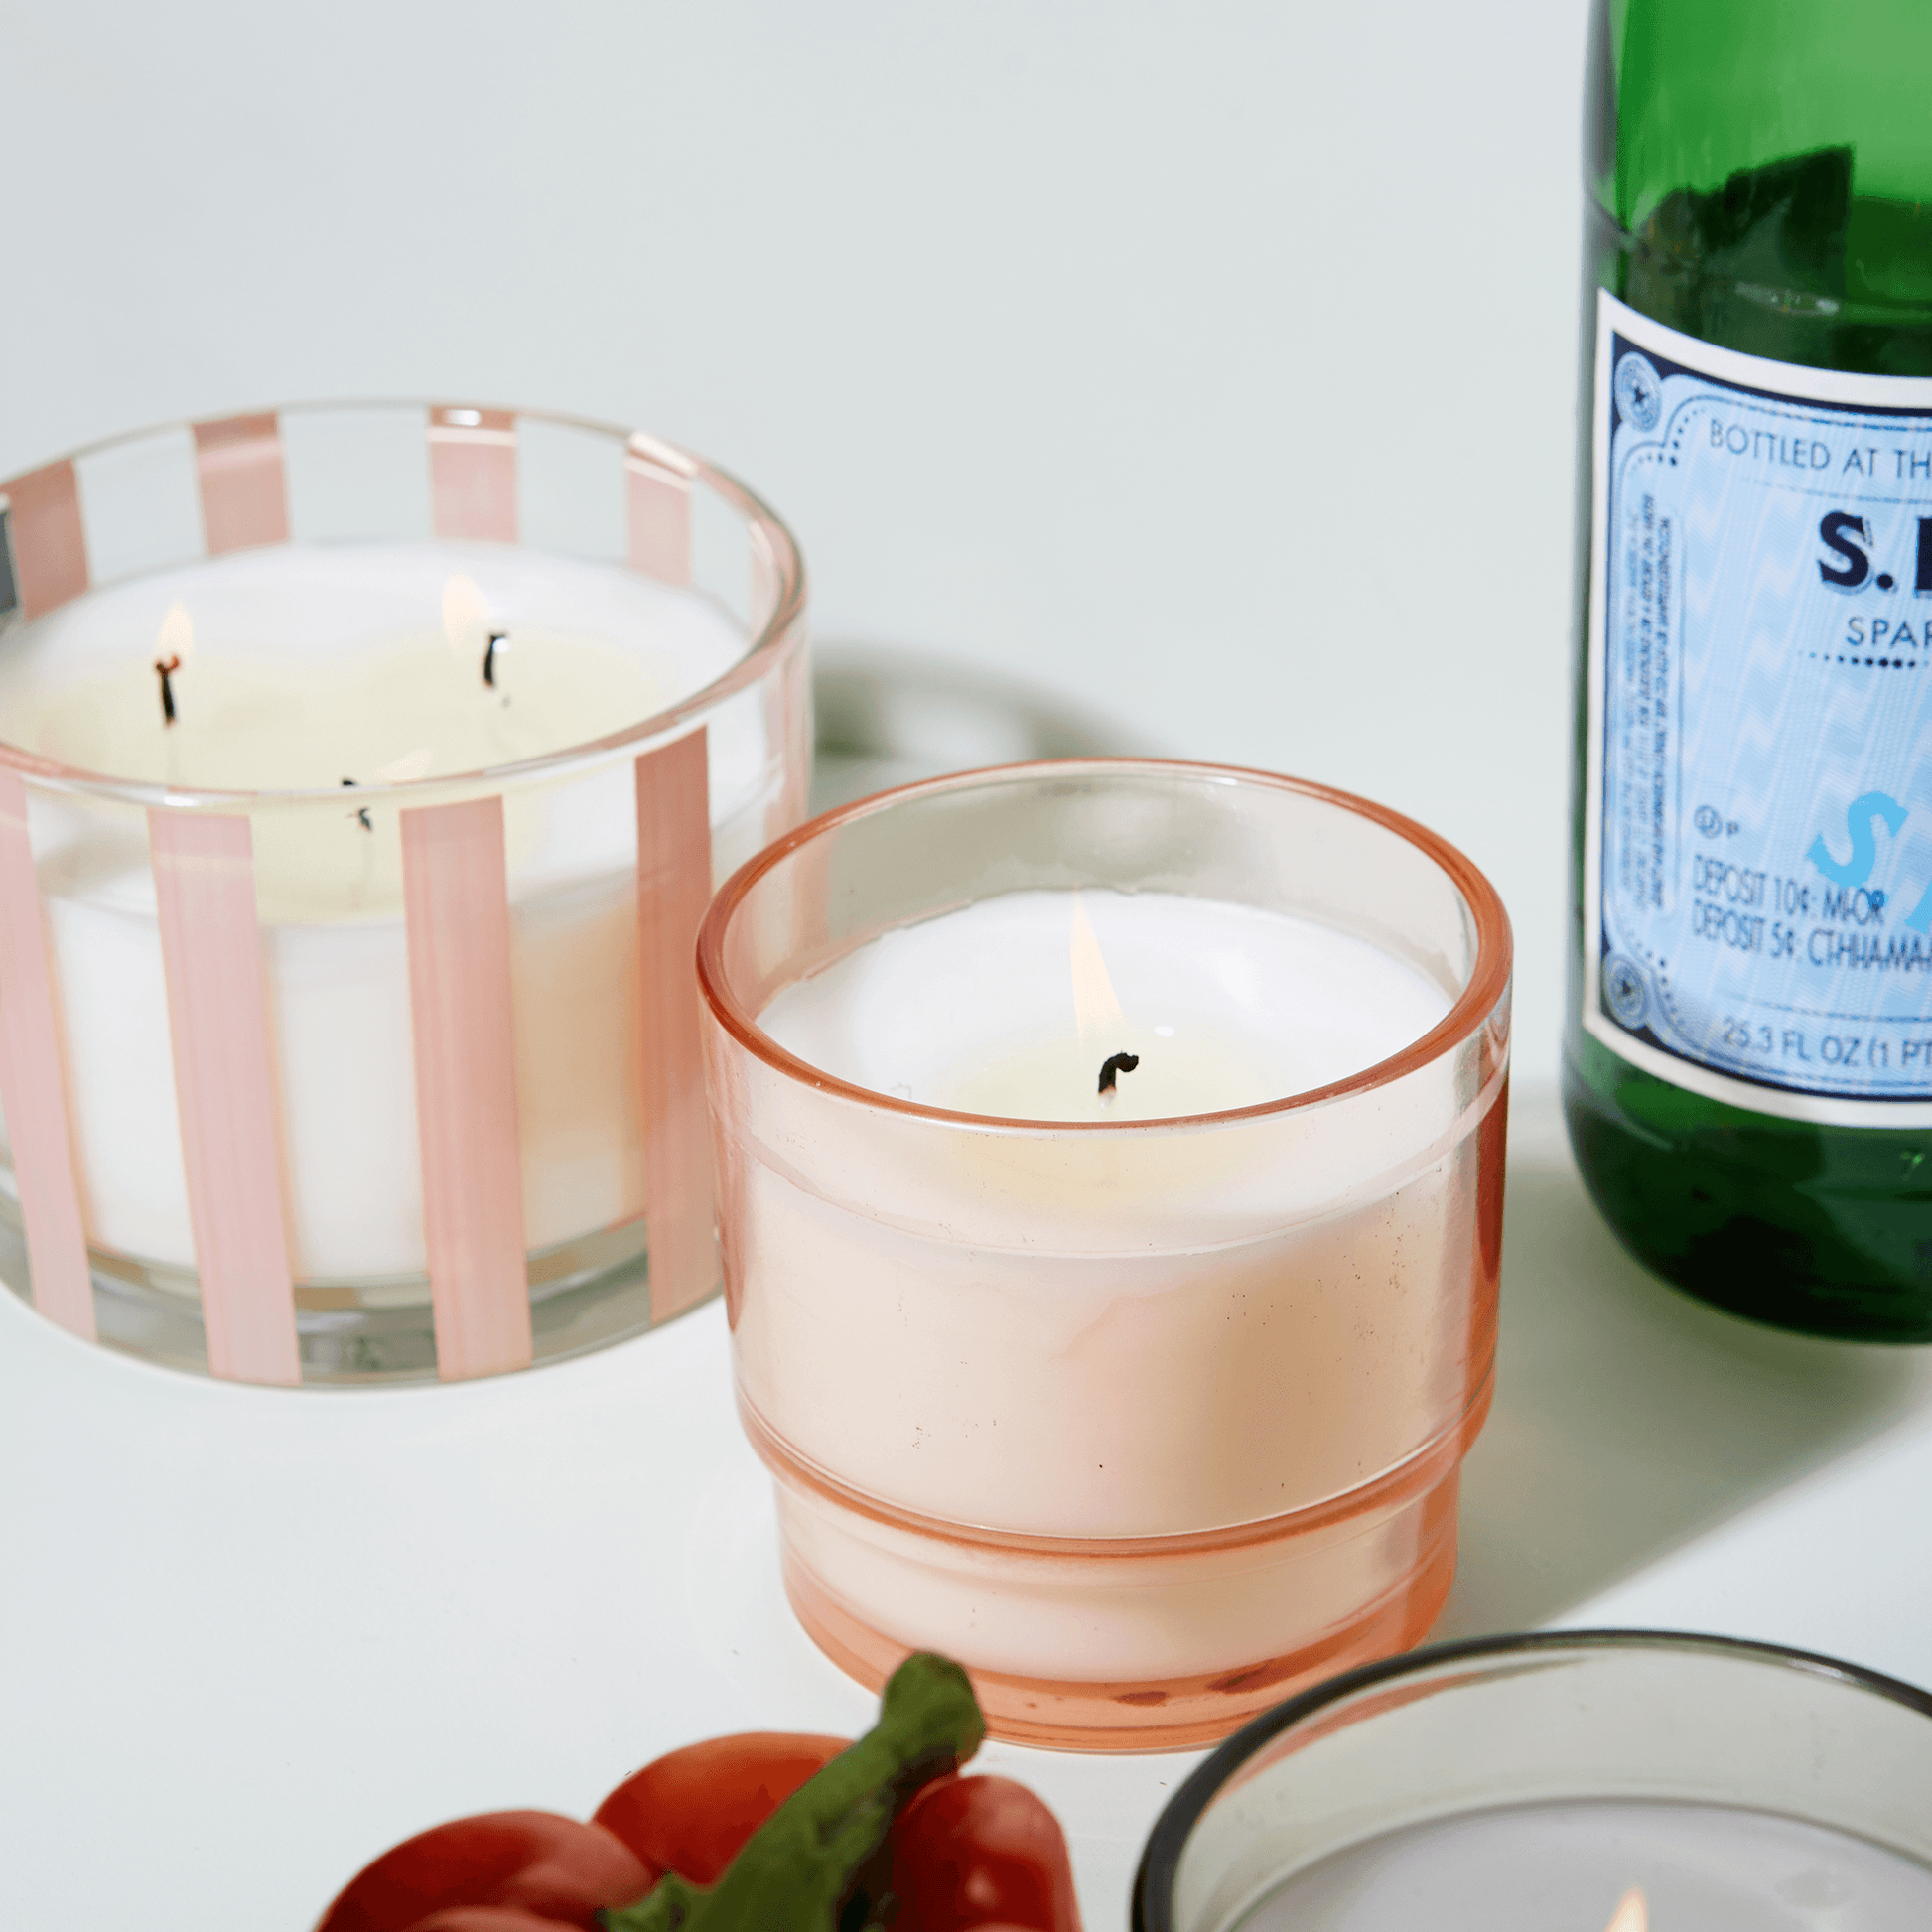 7 oz Al Fresco candle with a light pink vessel pictured next to the larger 12oz Al Fresco candle of the same color.